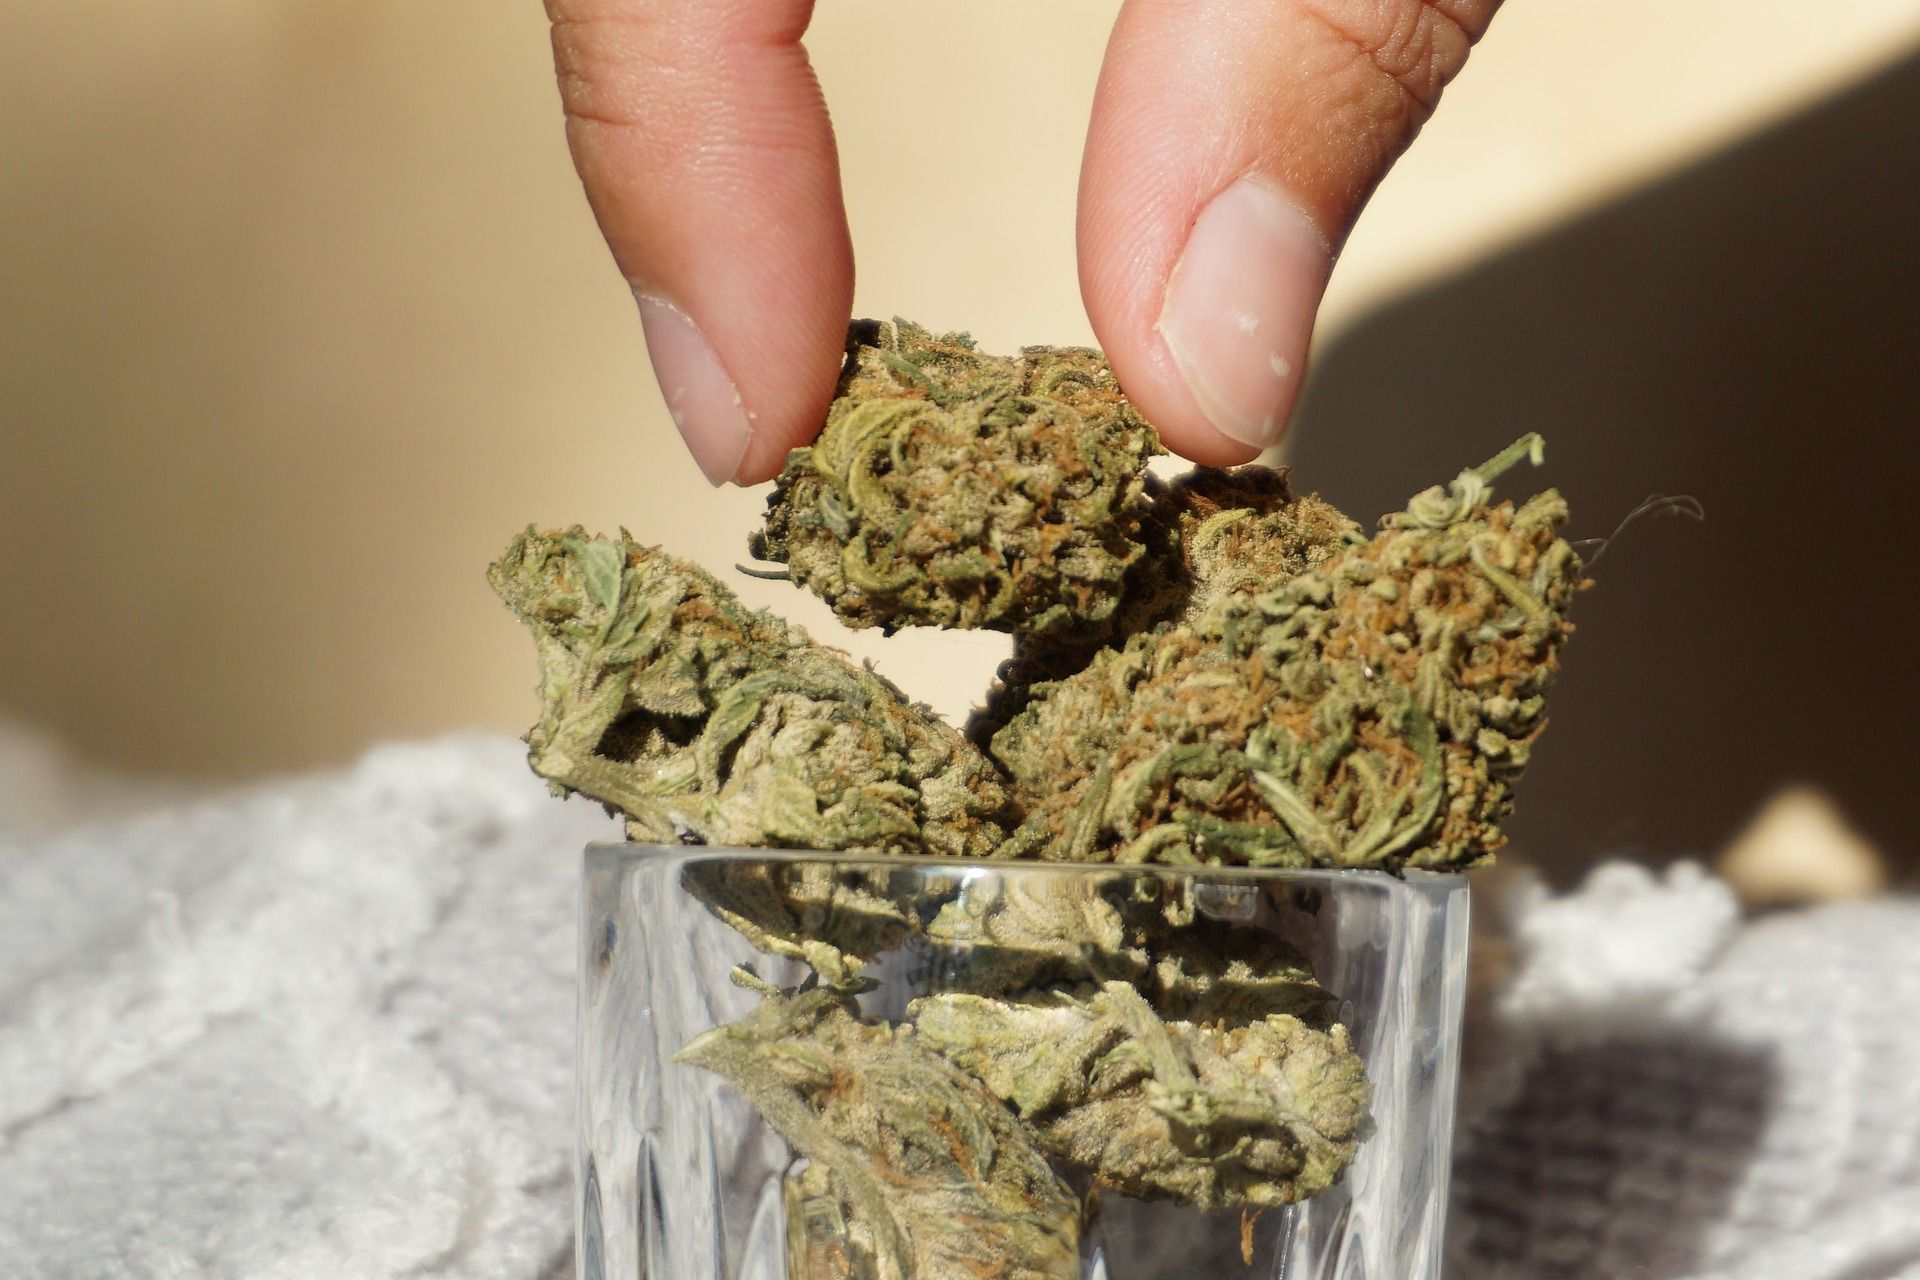 How Long Does THC (Marijuana) Stay In Your System Urine, Hair And